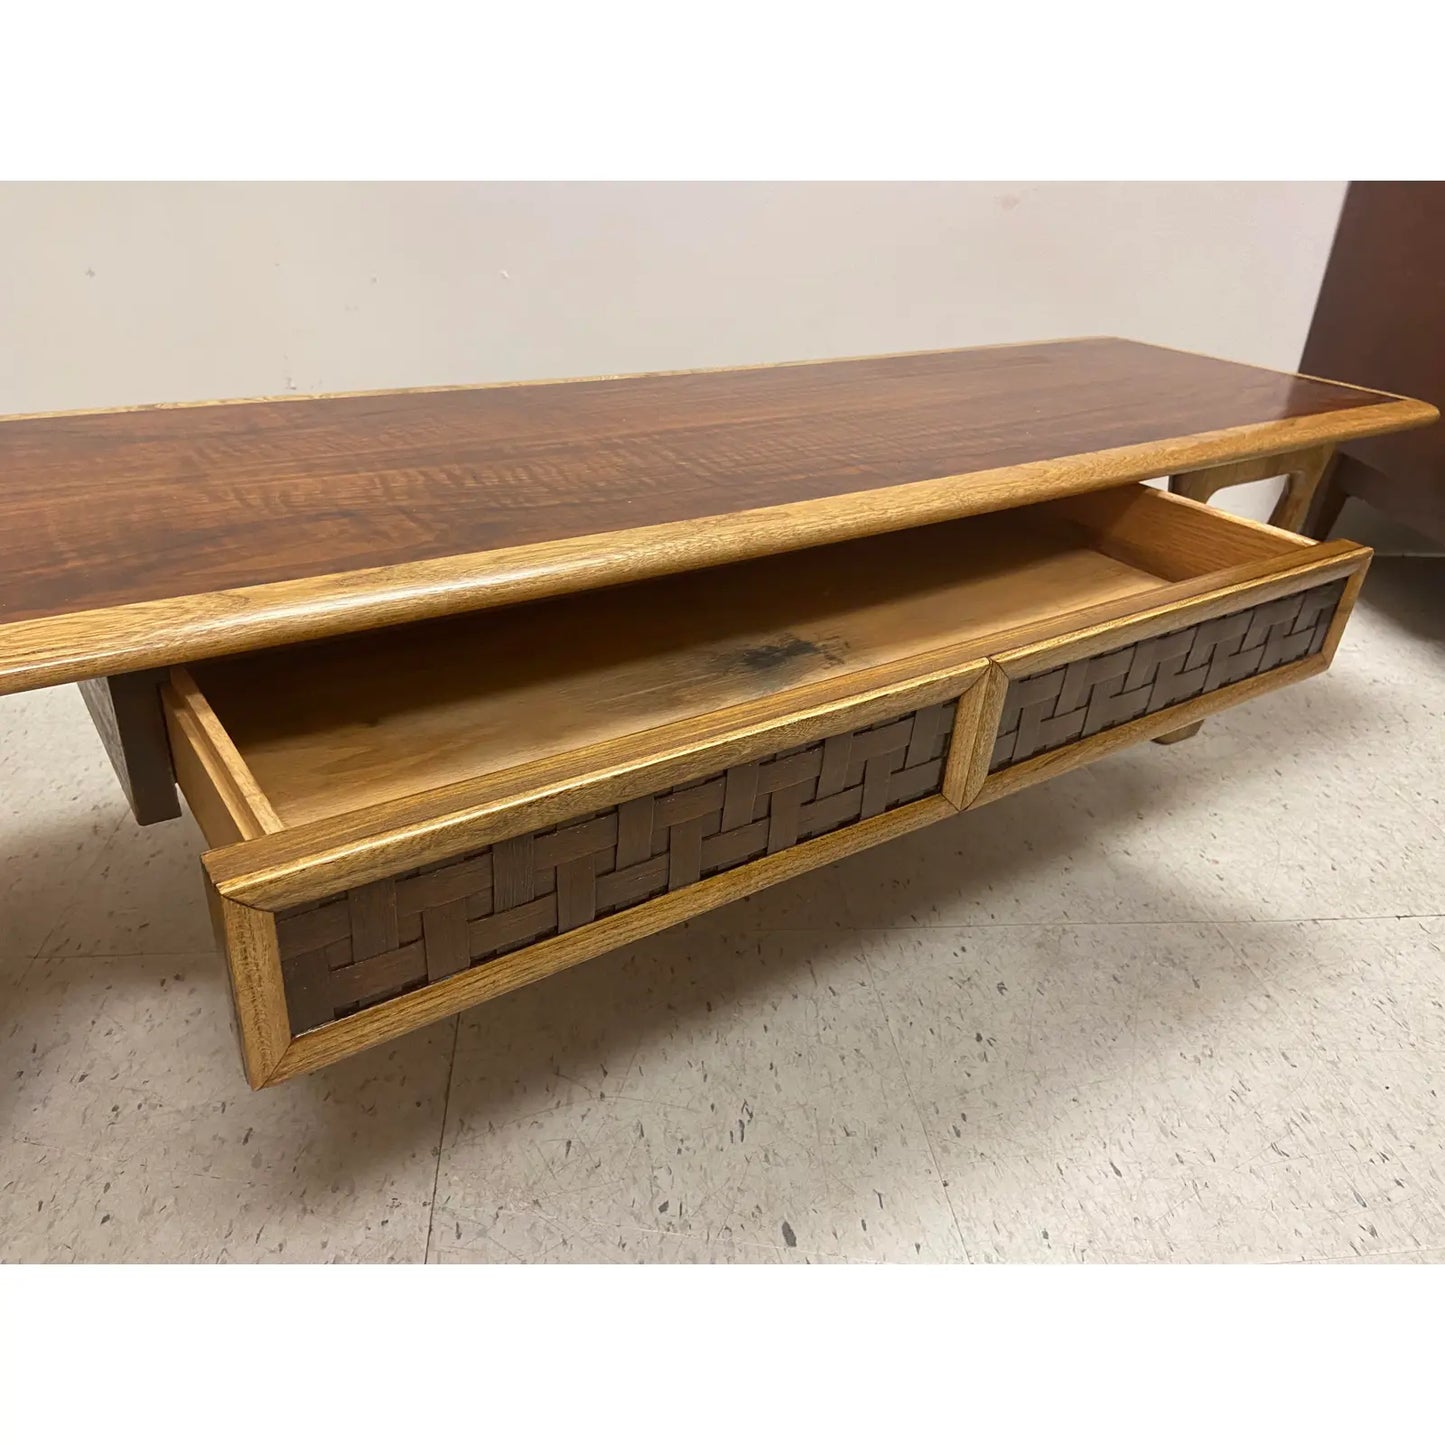 LANE PERCEPTION COFFEE TABLE WITH WALNUT & SCULPTURAL LEGS